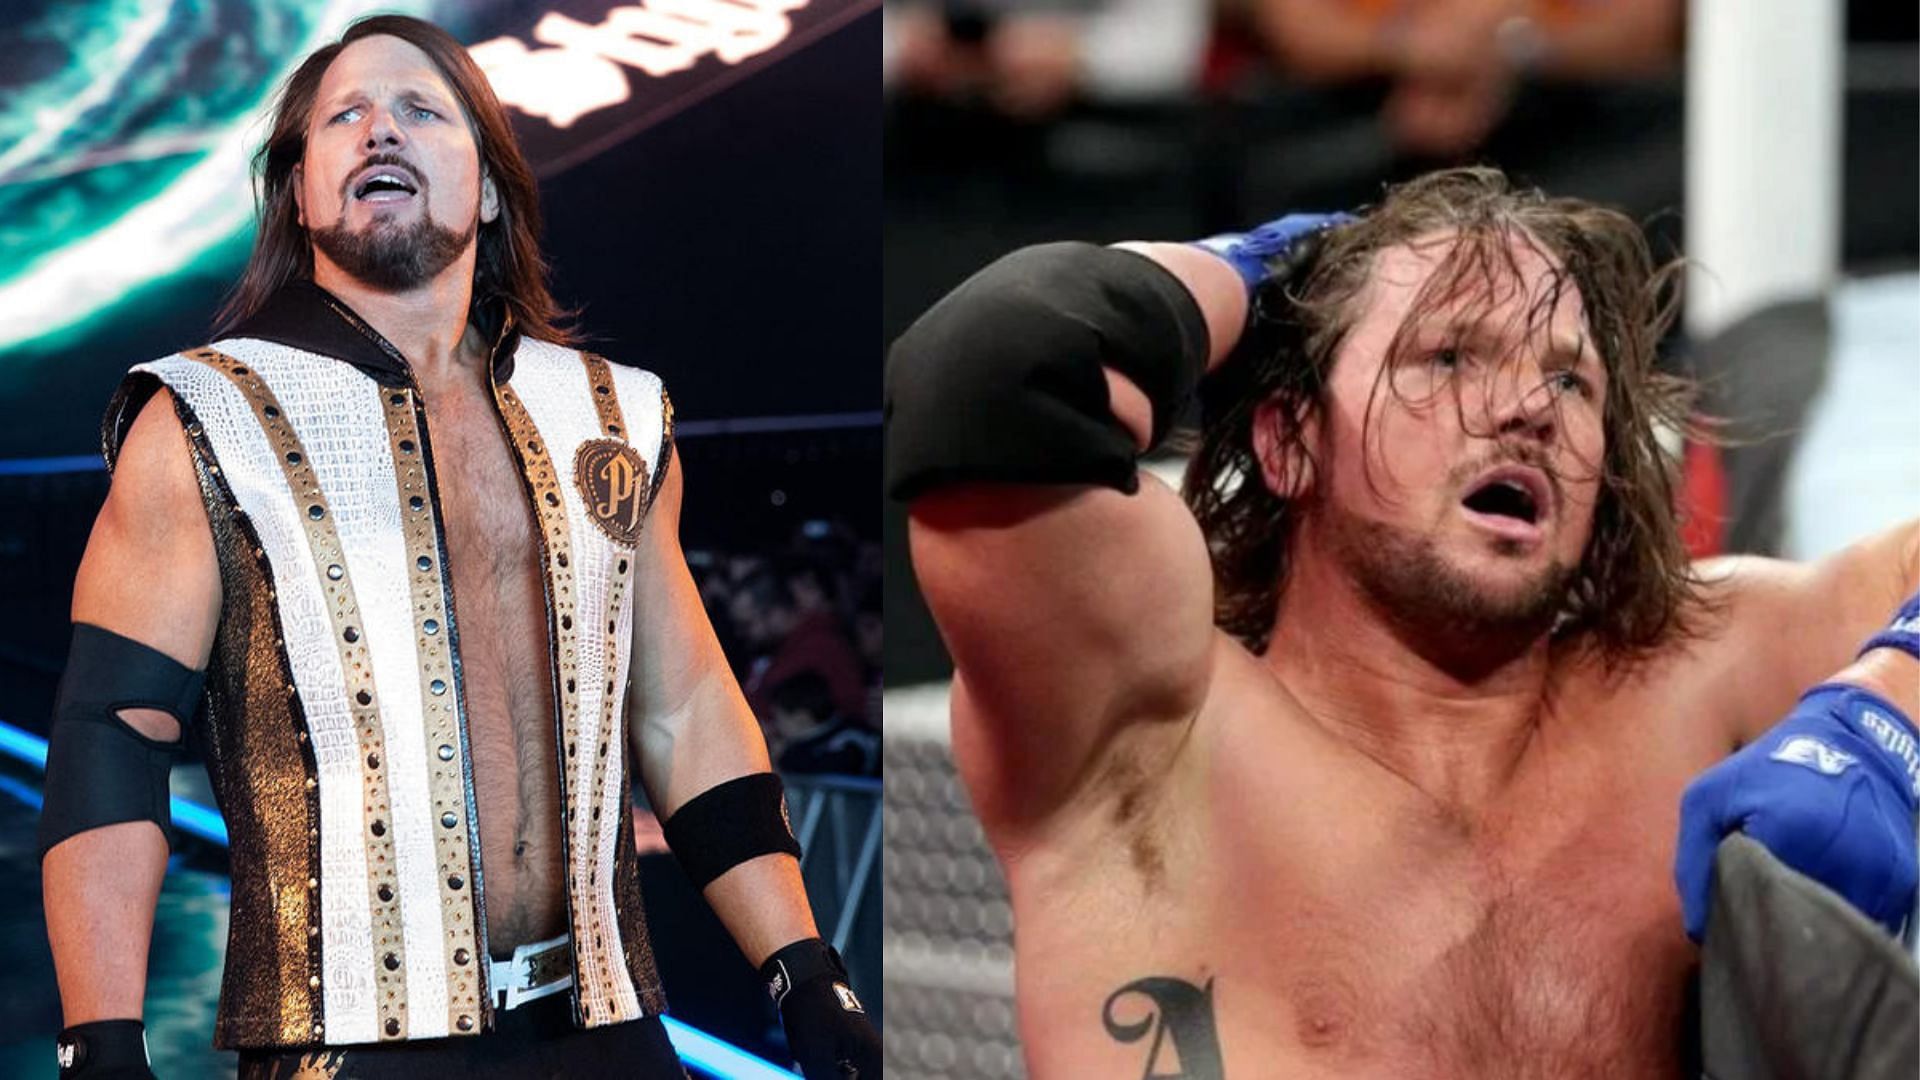 AJ Styles has been a top-tier WWE since his return in 2016